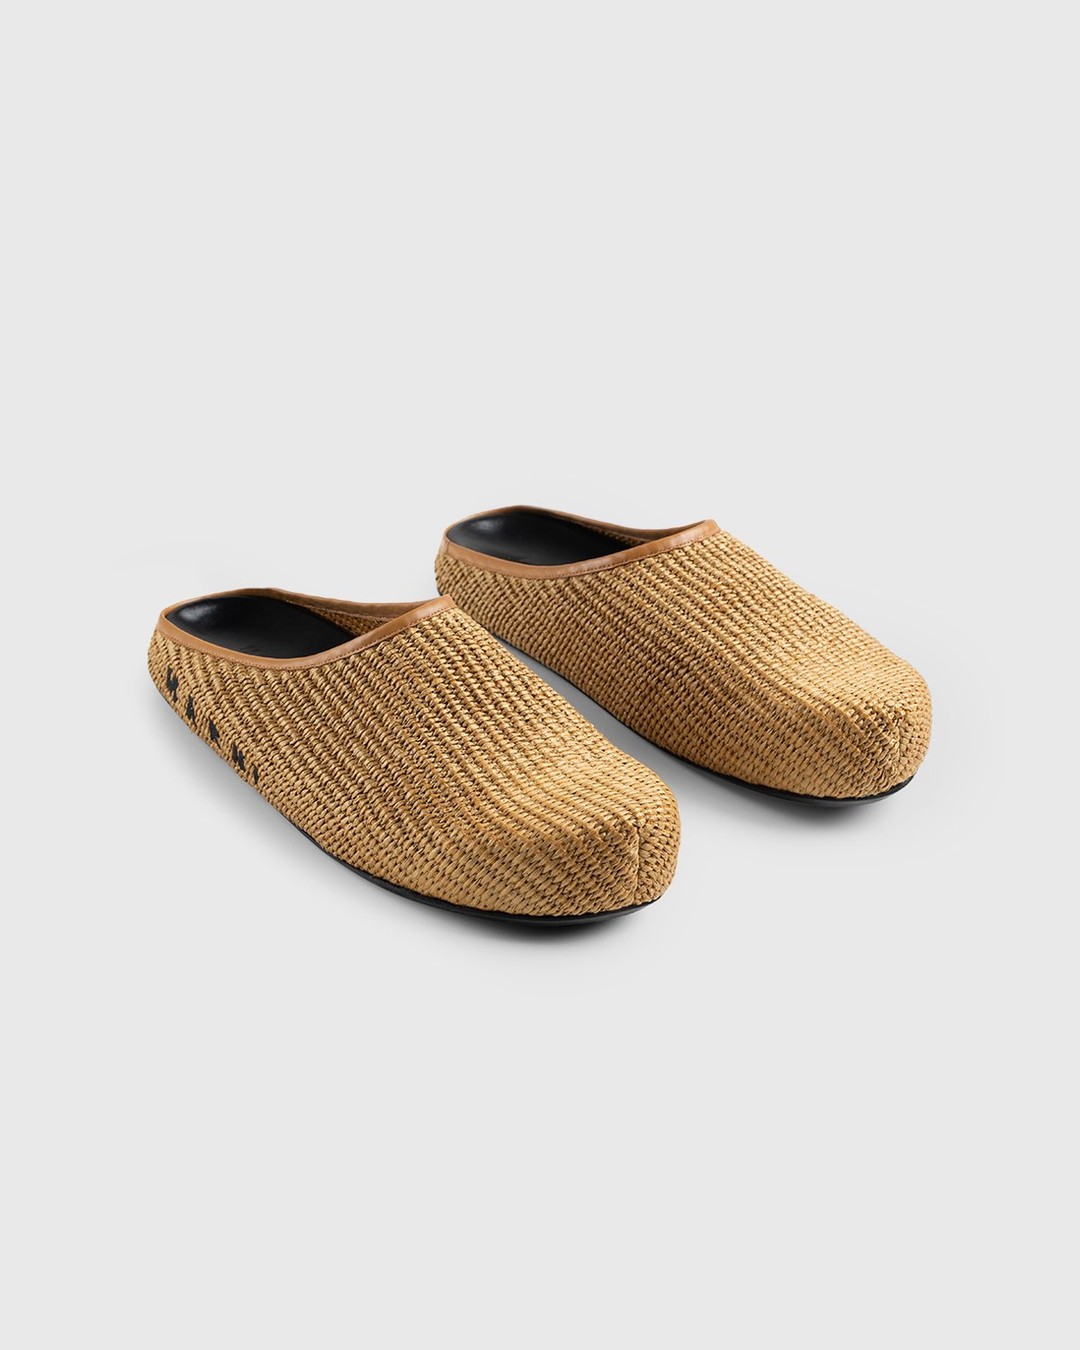 Marni – Woven Raffia and Leather Mules Brown/Black - Mules - Brown - Image 3